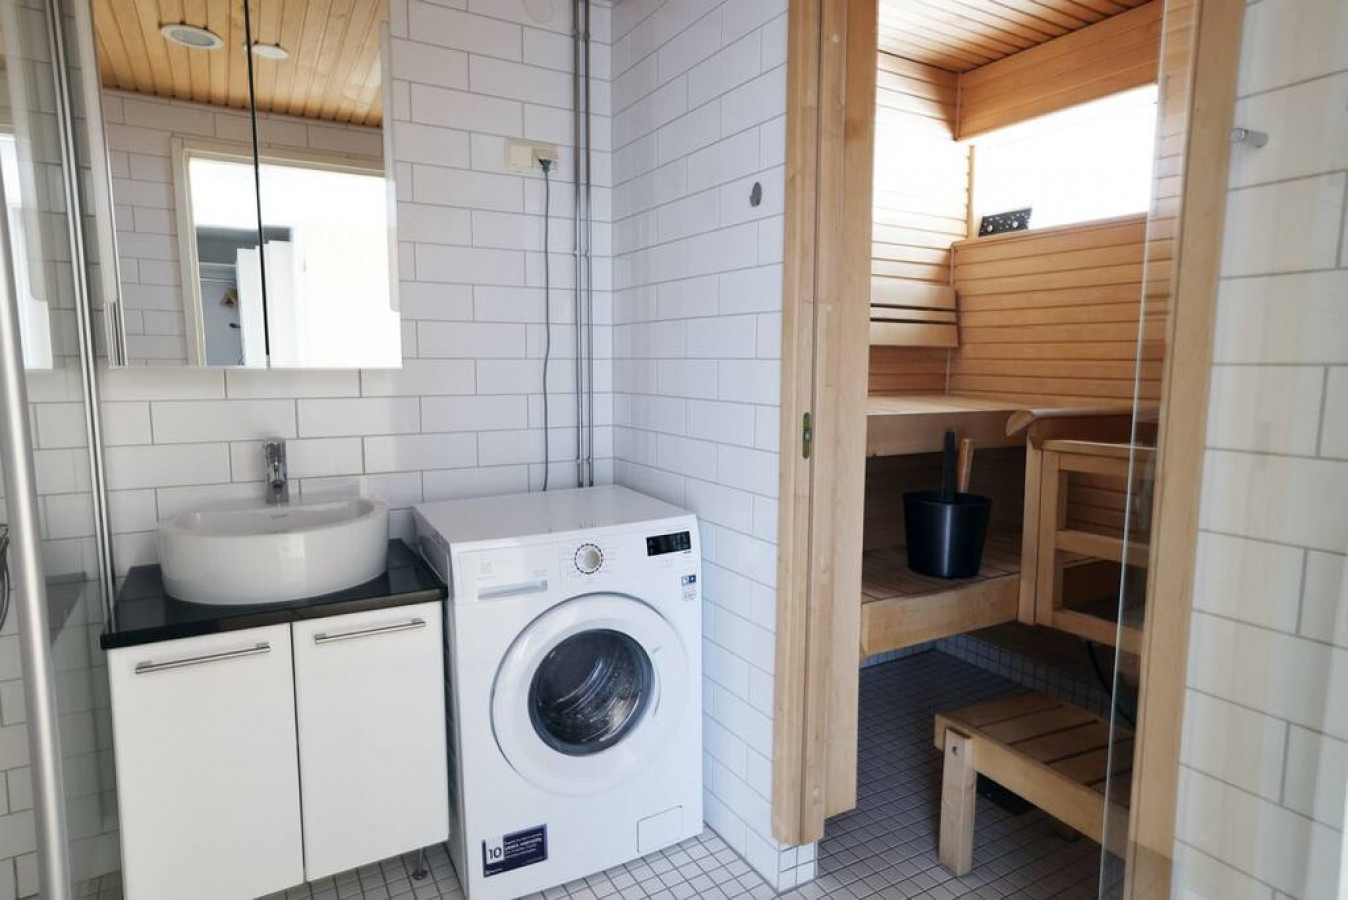 Deluxe 1BR Home with Sauna & Balcony, Great Loc!